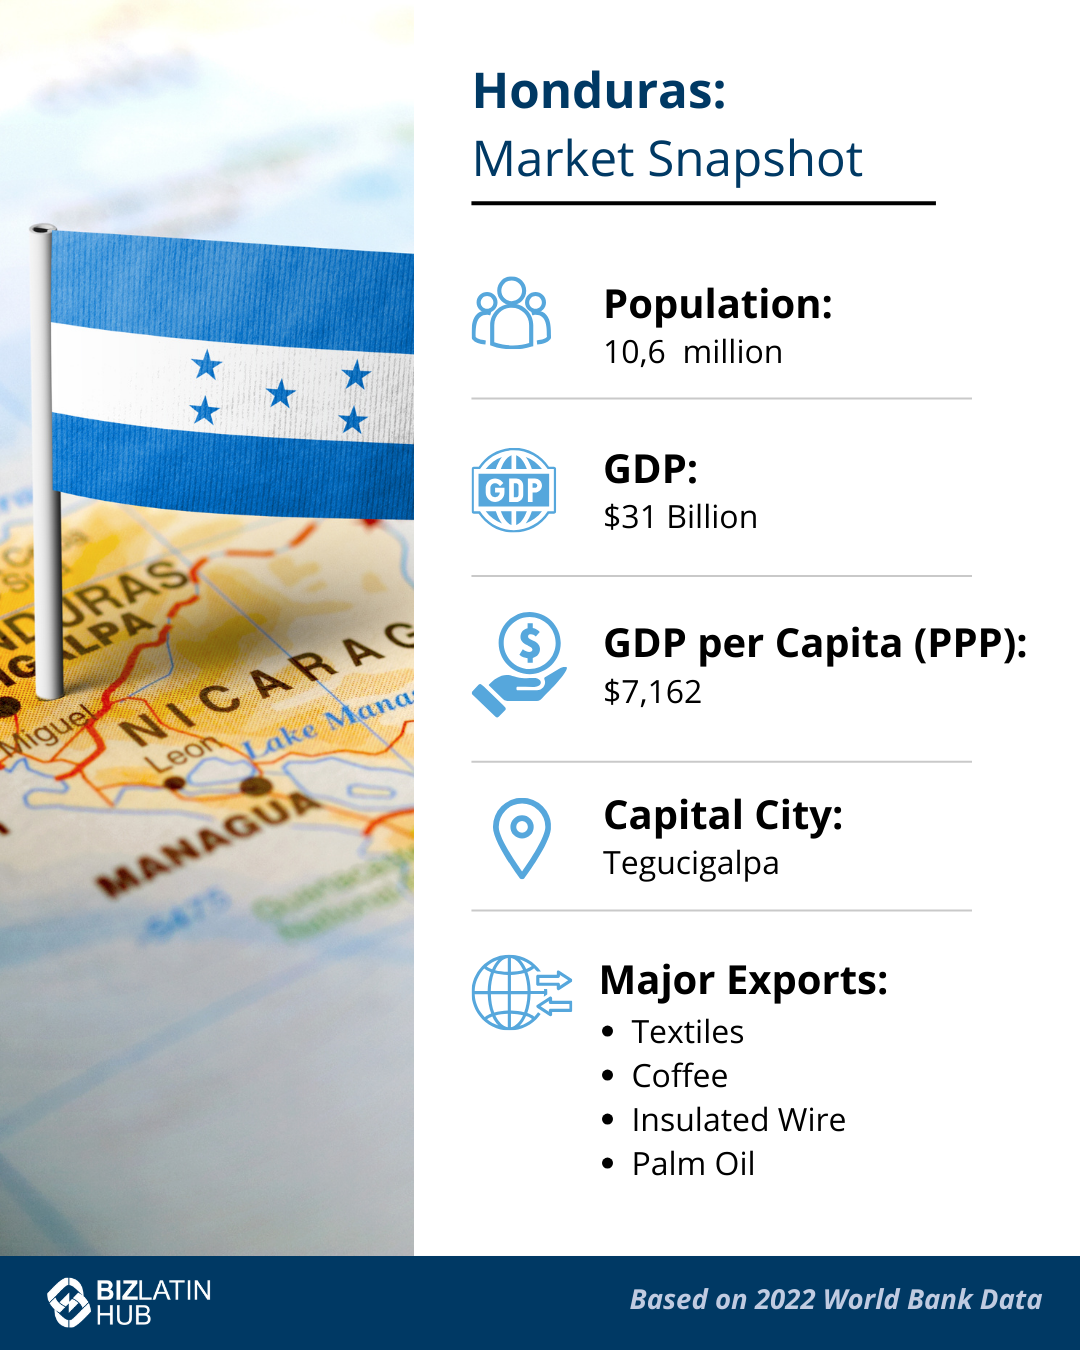 Infographic titled "Honduras: Market Snapshot." It includes a flag of Honduras and a map in the background. Information listed: Population: 10.6 million, GDP: $31 billion, GDP per Capita (PPP): $7,162, Capital City: Tegucigalpa, Major Exports: Textiles, Coffee, Insulated Wire, Palm Oil. Company Formation in